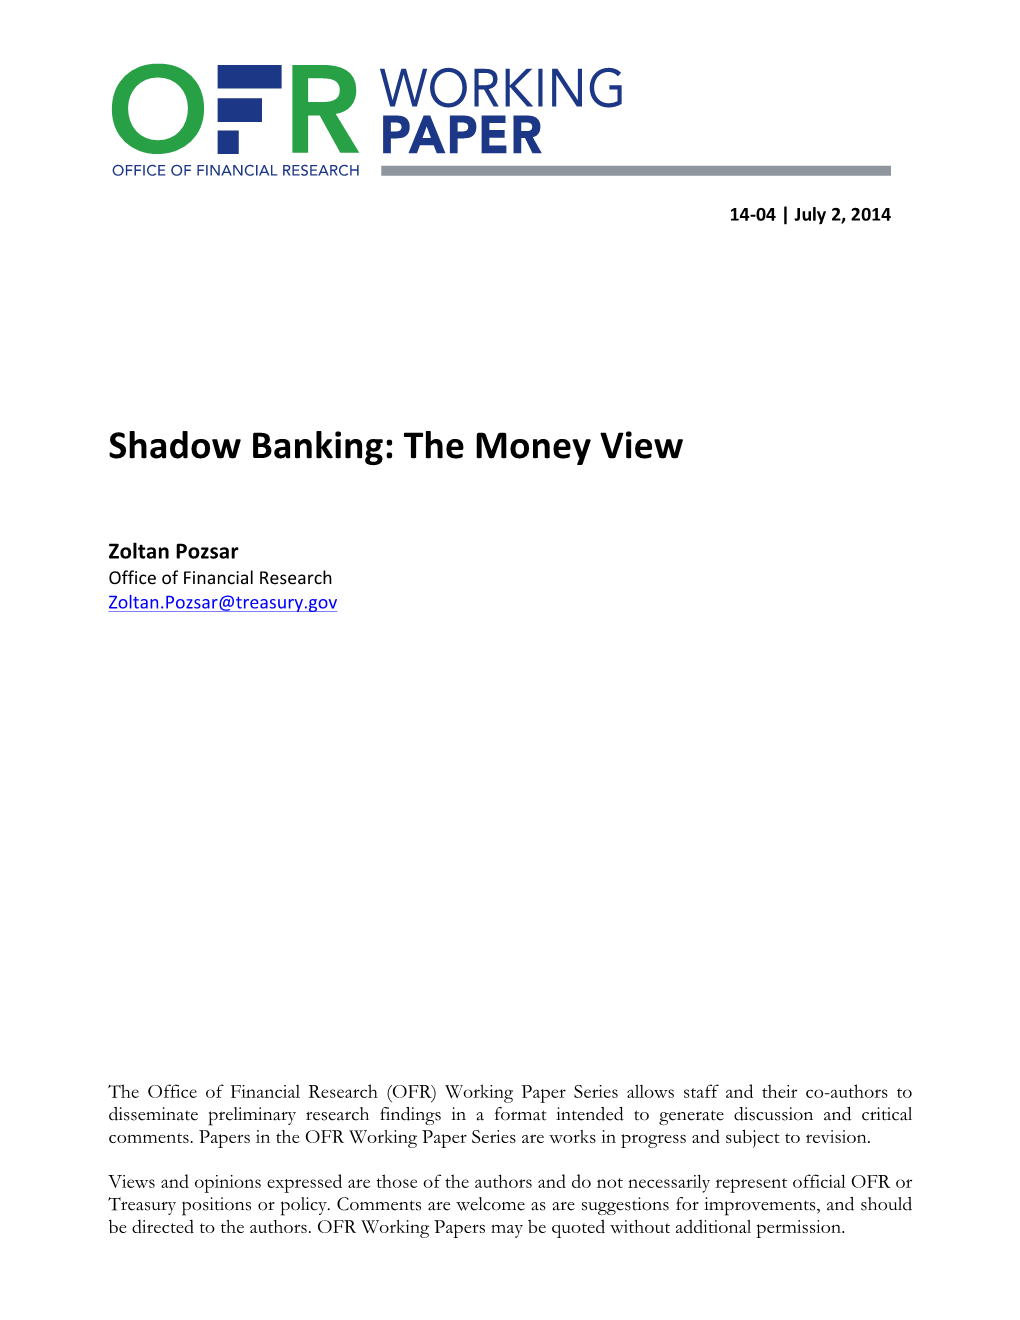 Shadow Banking: the Money View by Pozsar